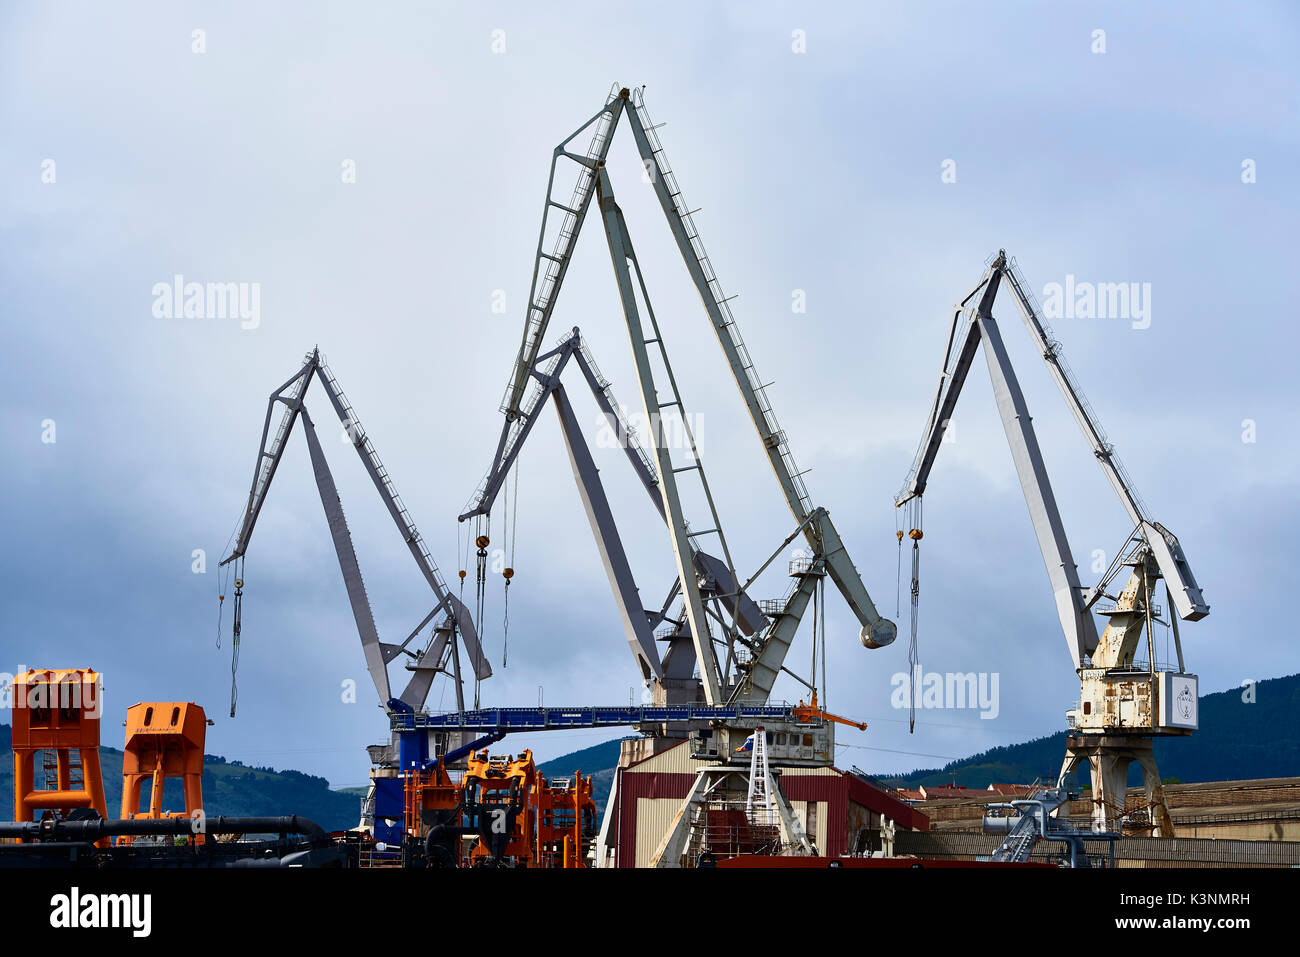 Shipbuilding In Spain High Resolution Stock Photography and Images - Alamy